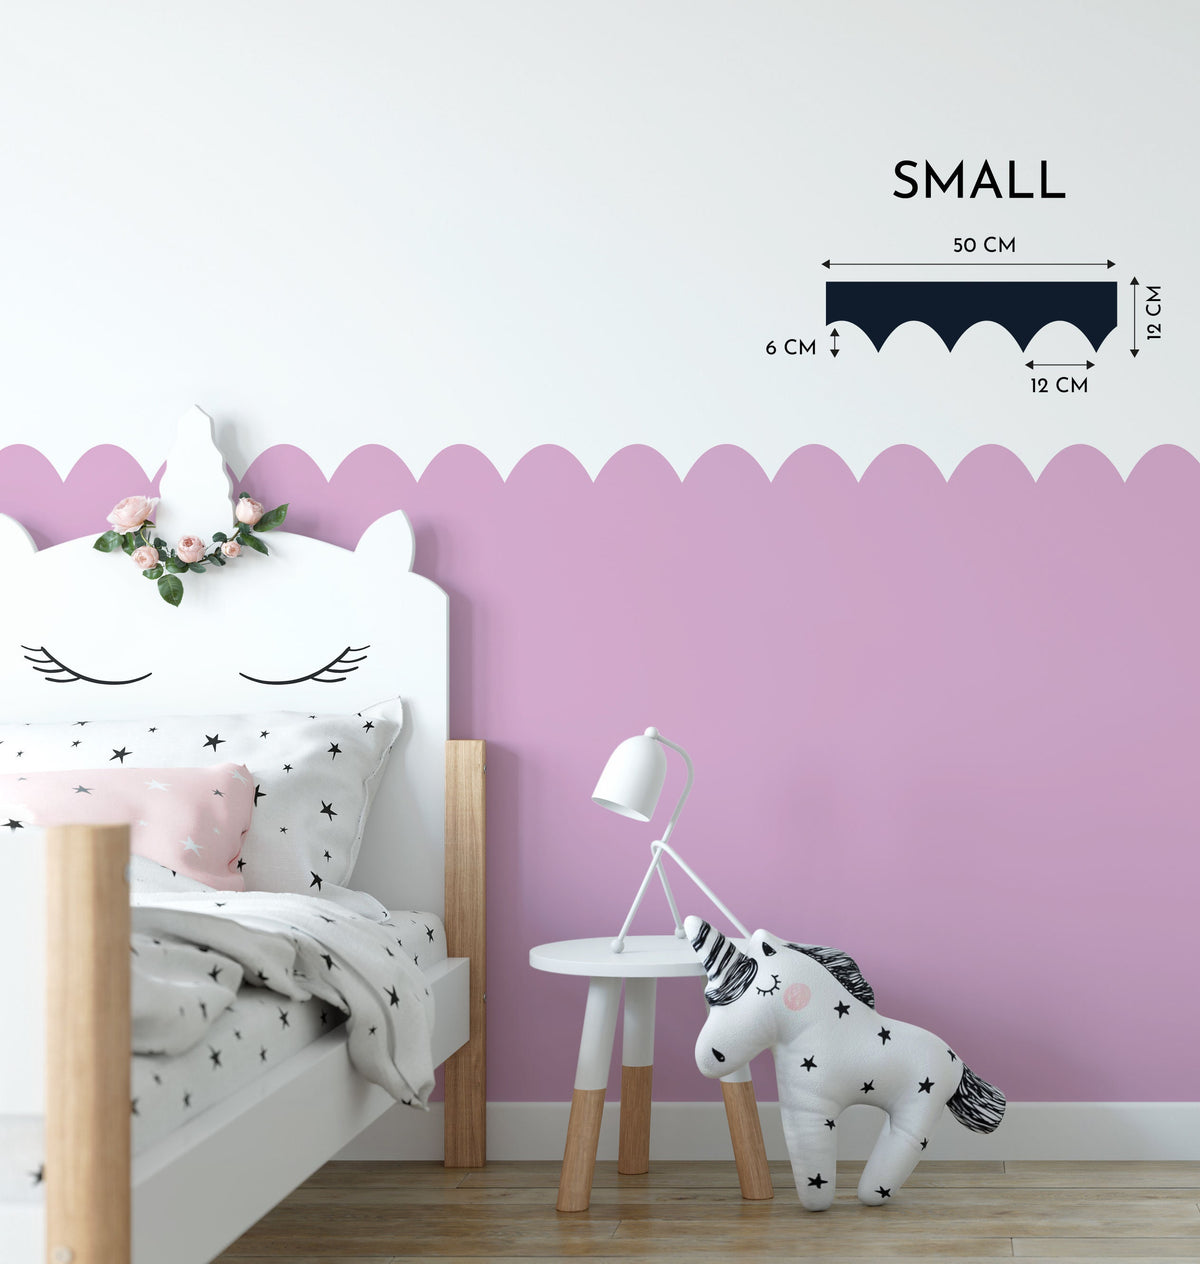 Rounded Wall Paint Stencil For Boarders Painting | Kids Rooms Boys & Girls Nursery Room Boarder